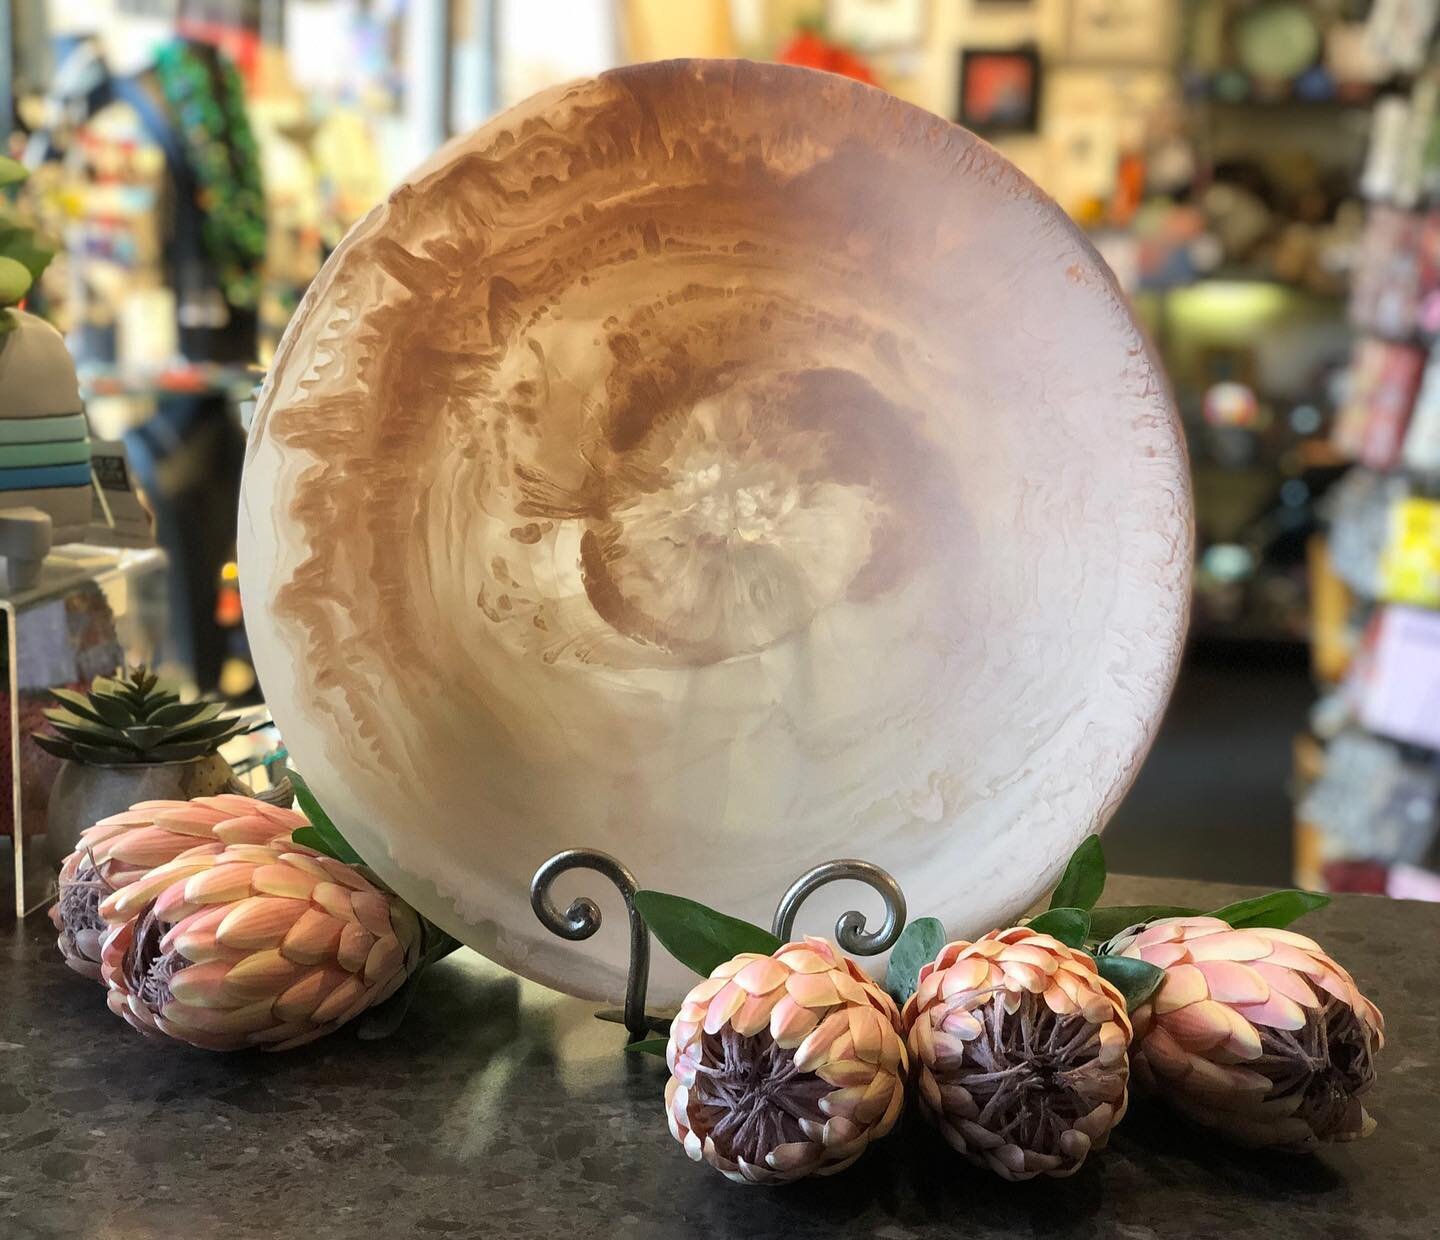 NEW colours available in our best selling resin tableware - Blush! The perfect fruit bowl or tableware, these pieces do not stick around long. 

#alburypictureframers #alburygiftware #alburycbd #resin #alburywodonga #amplane